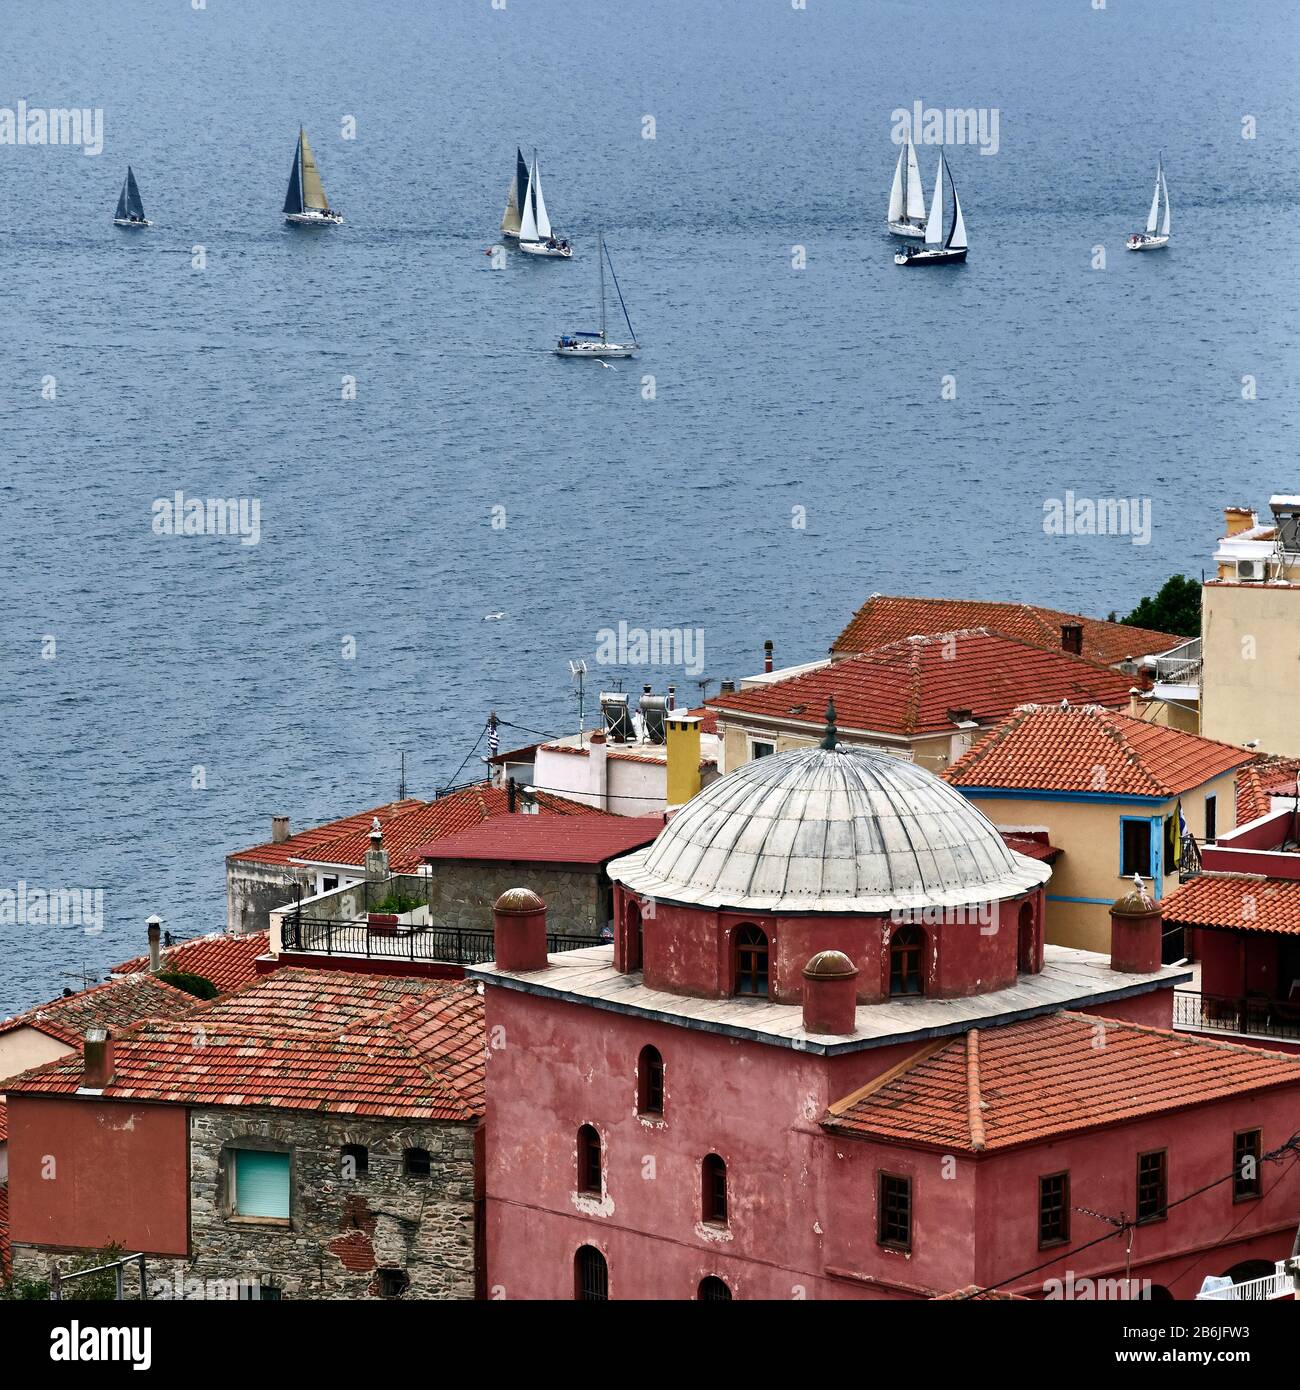 Kavala, Eastern Macedonia, Aegean Sea, Greece, view of the Aegean Sea and its sailboats from the Byzantine fortress of the port of Kavala Stock Photo